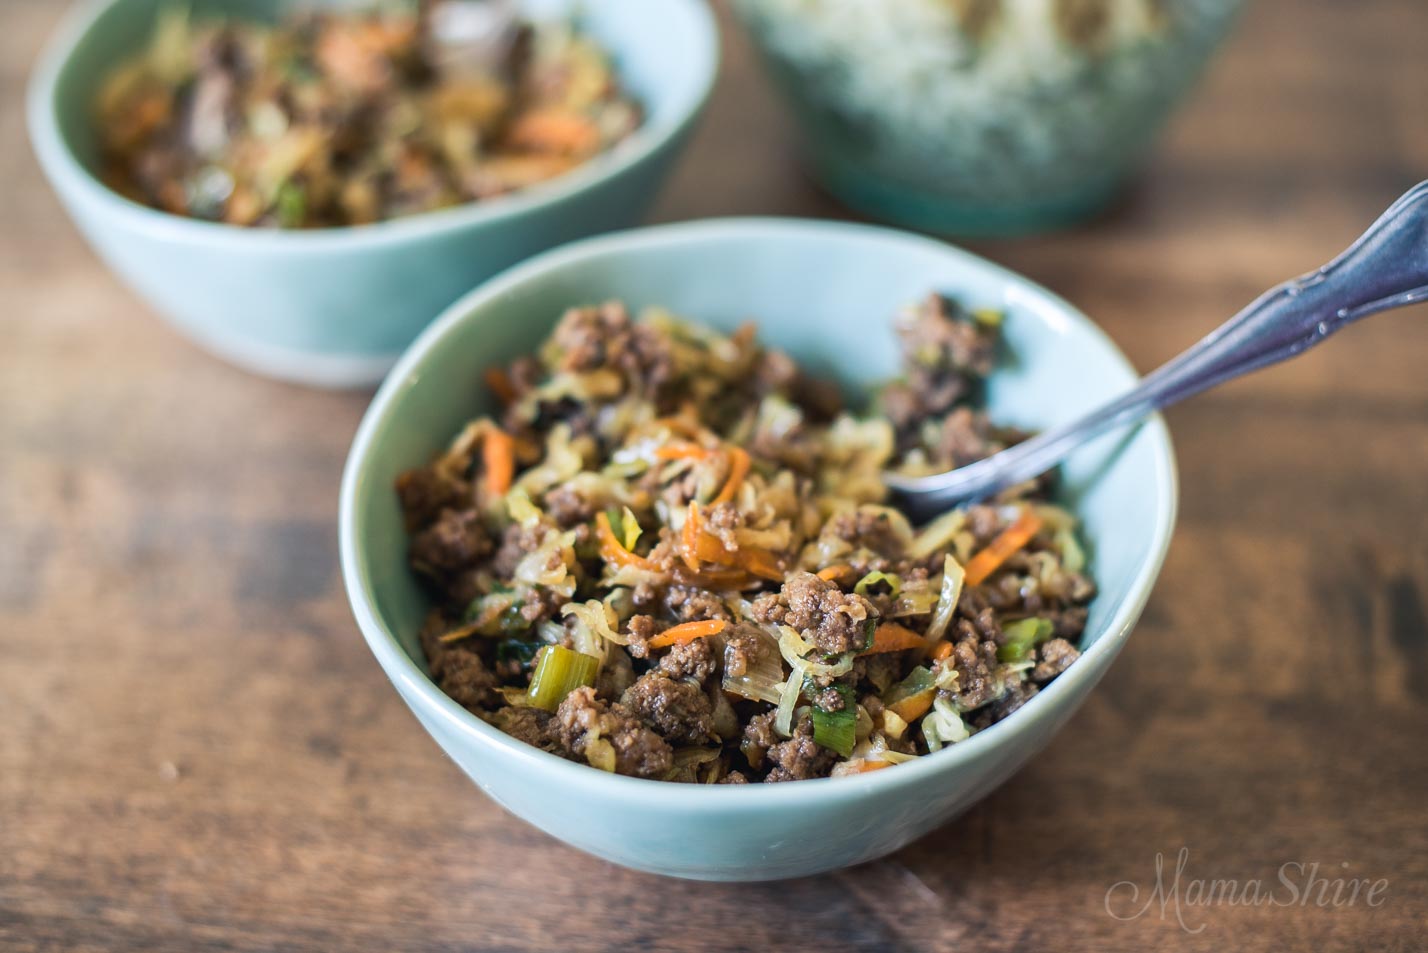 Mongolian Beef Egg Roll in a Bowl - Gluten-free, Low-carb, THM-FP